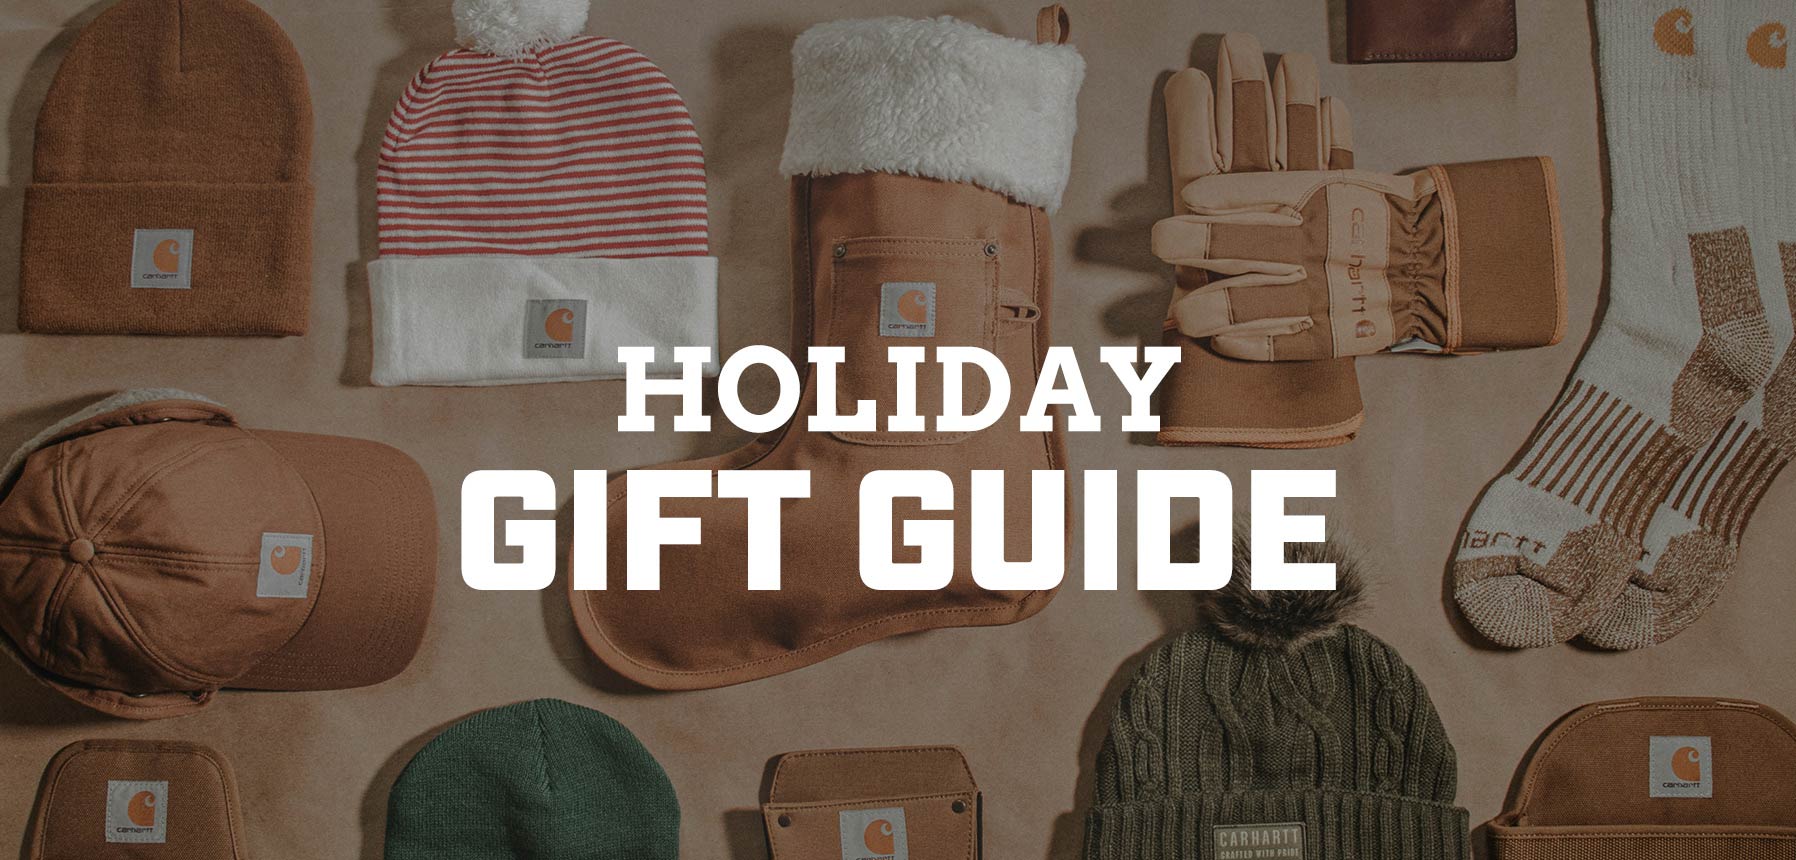 Dungarees' Gift Guide